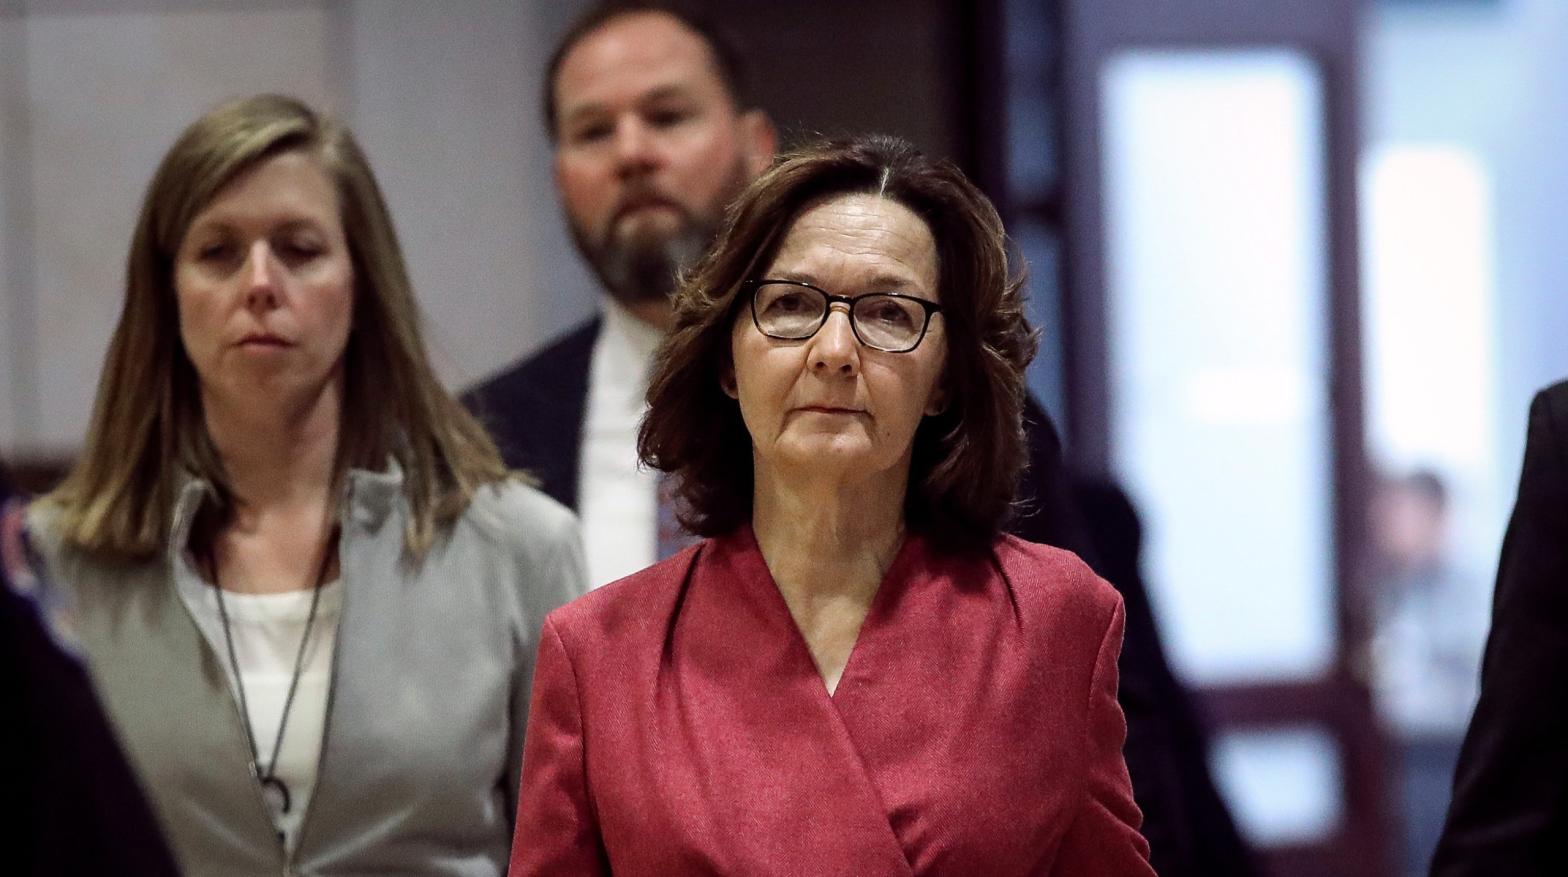 CIA Director Gina Haspel arrives for a briefing with members of the U.S. House of Representatives about the situation with Iran, at the U.S. Capitol on January 8, 2020 in Washington, DC.  (Photo: Drew Angerer, Getty Images)